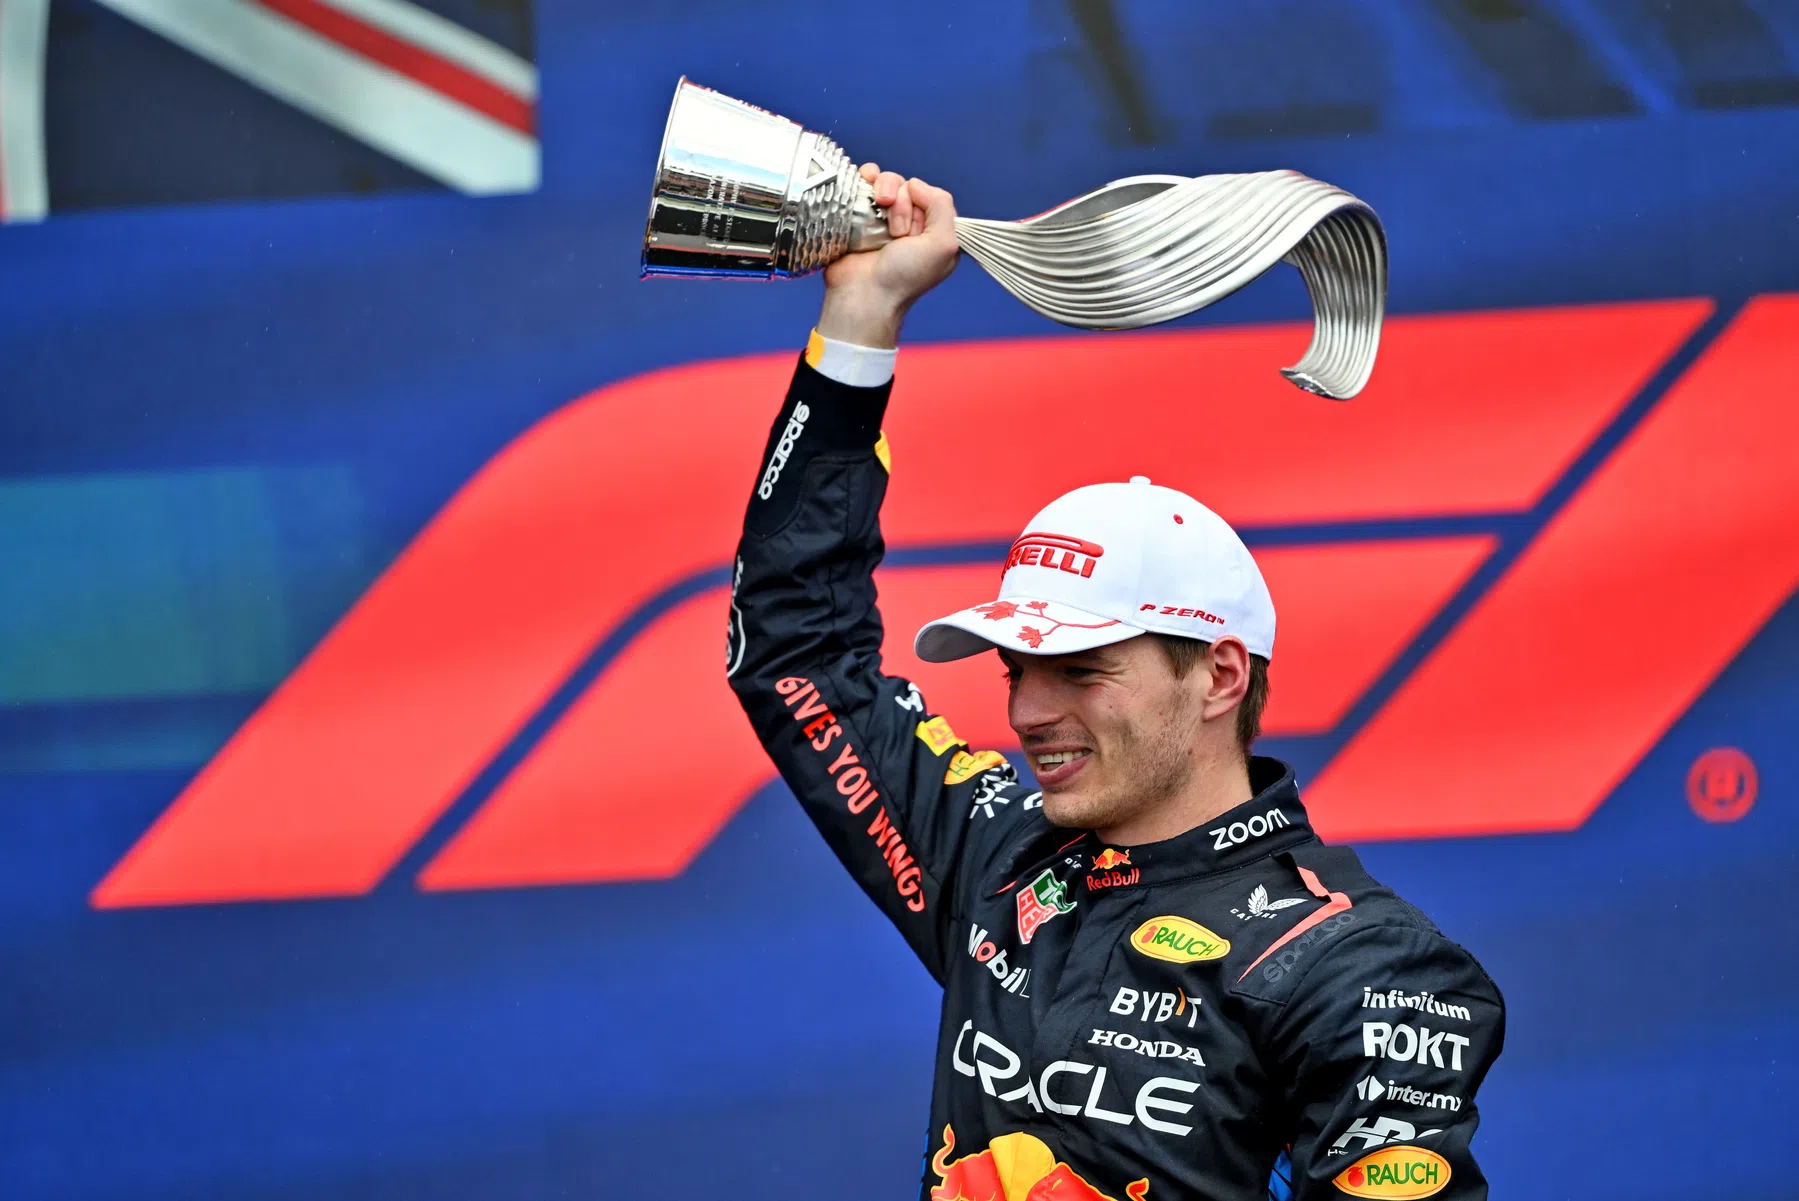 Windsor thinks Verstappen won precisely because of problems RB20